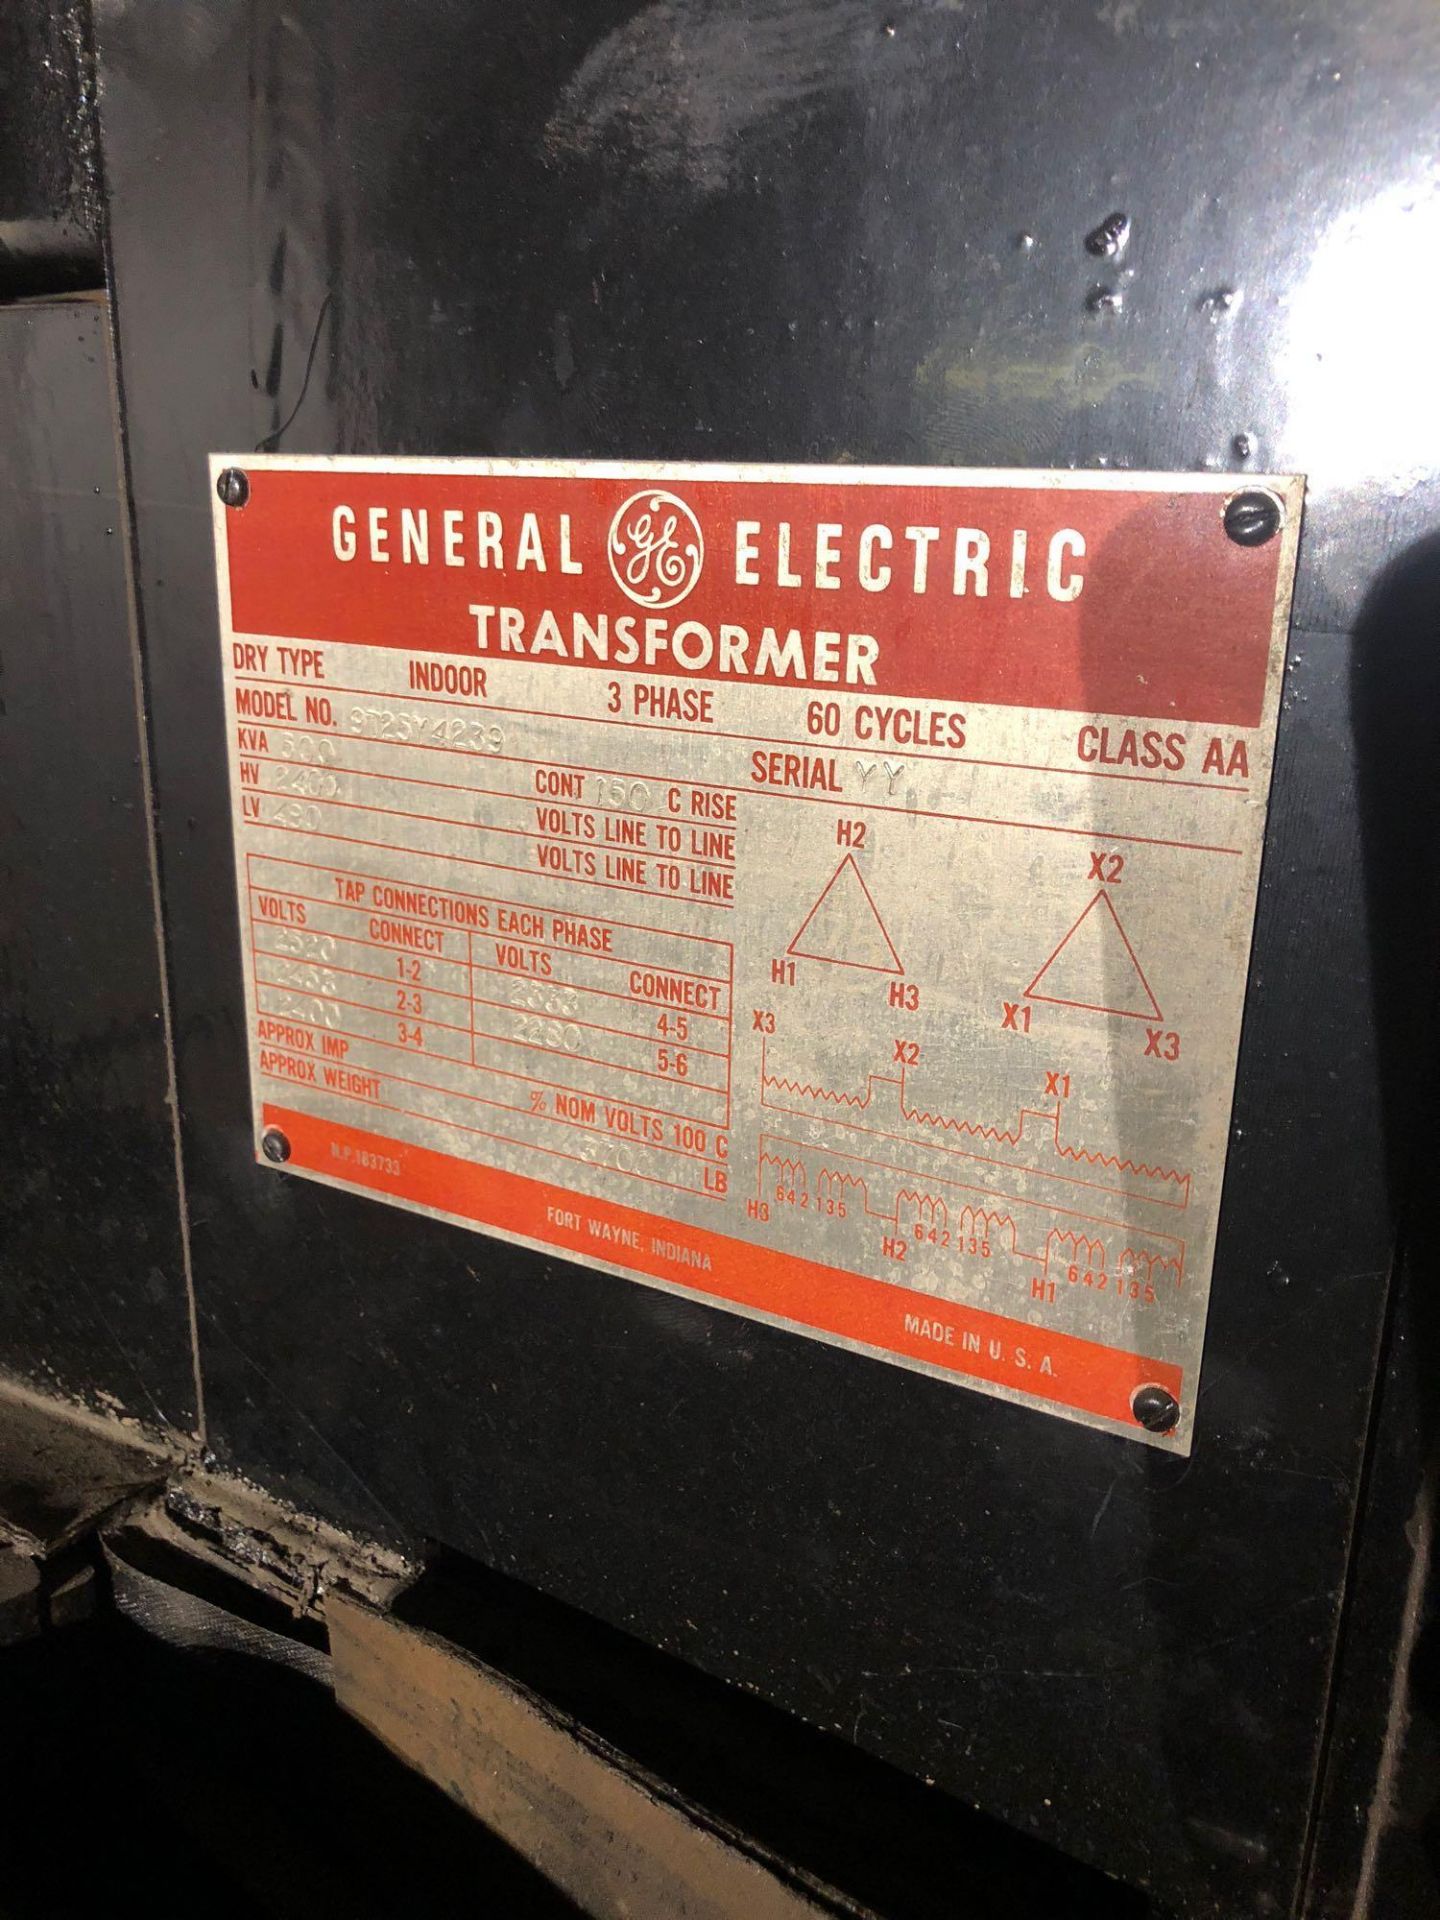 General Electric Transformer Model 9T25Y4239 - Image 2 of 3